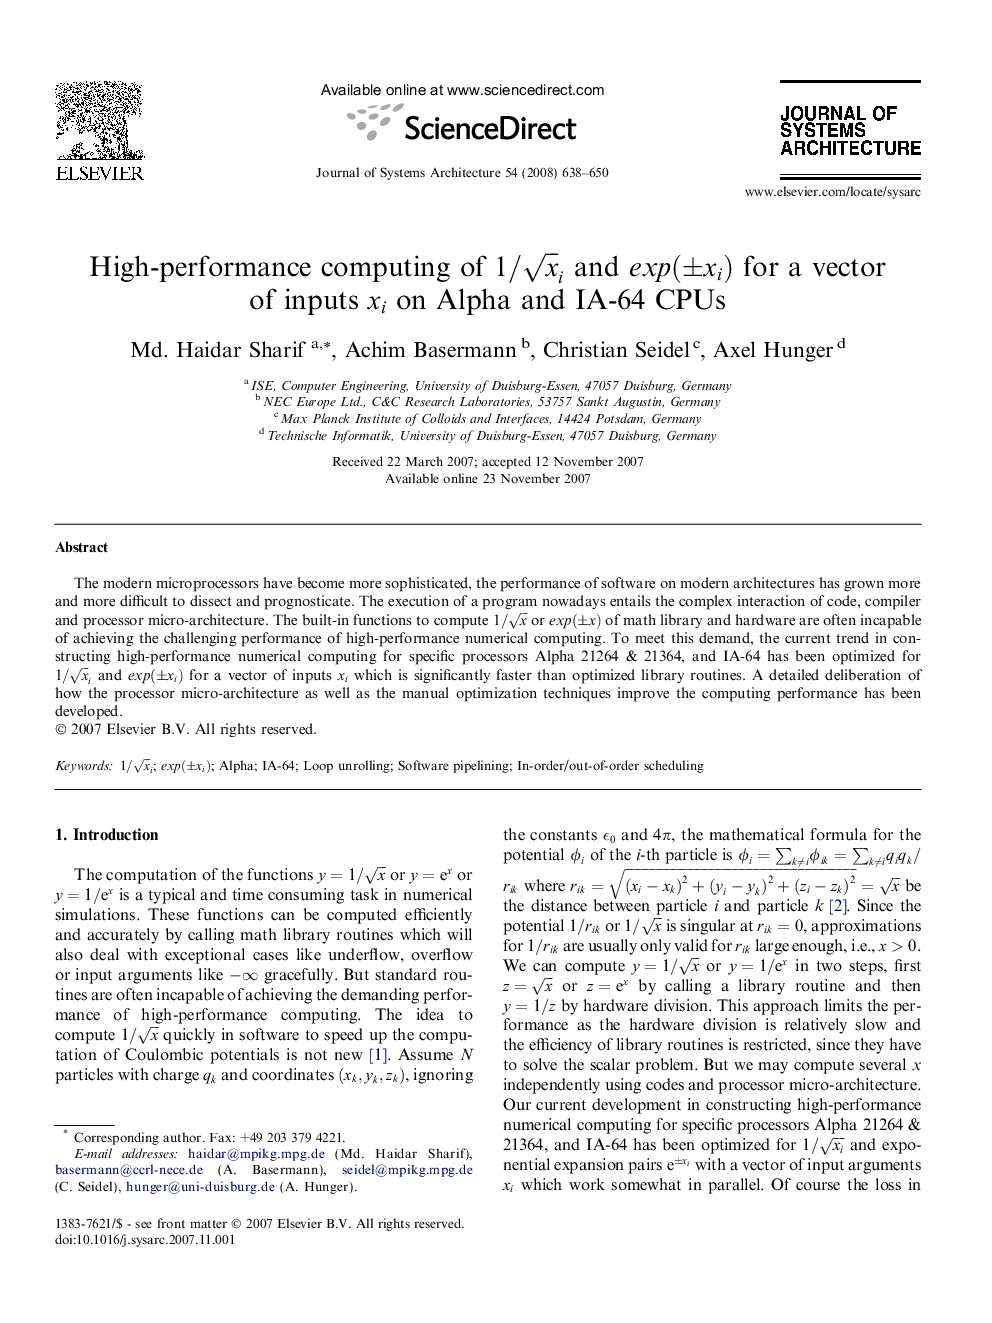 High-performance computing of 1/xiandexp(±xi) for a vector of inputs xixi on Alpha and IA-64 CPUs